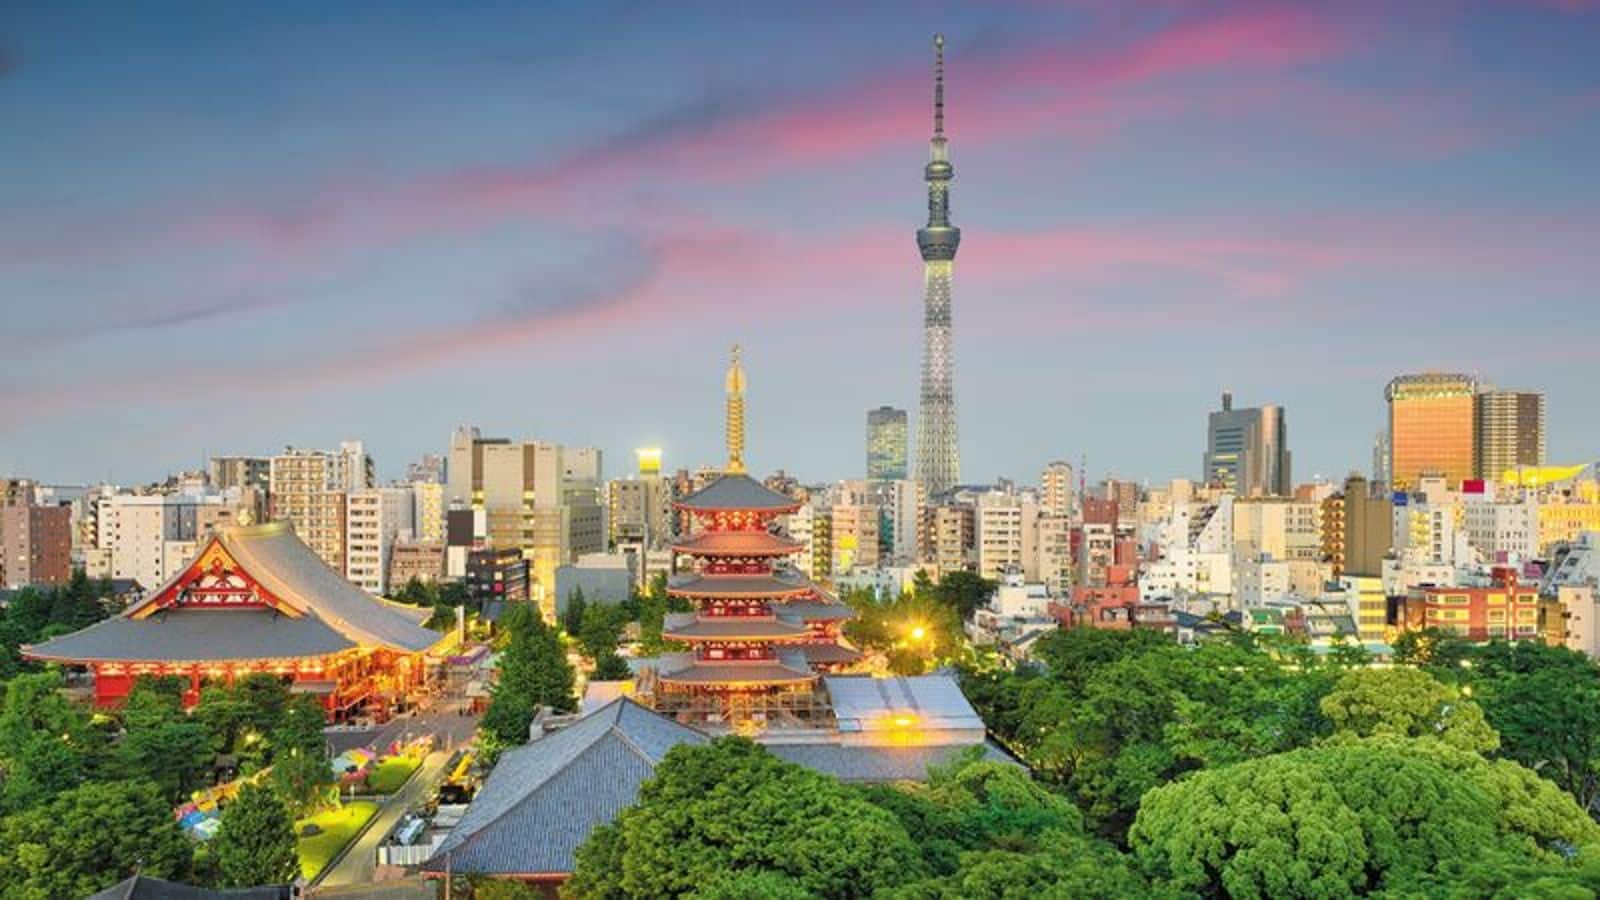 Discover Tokyo's rich history with this travel guide